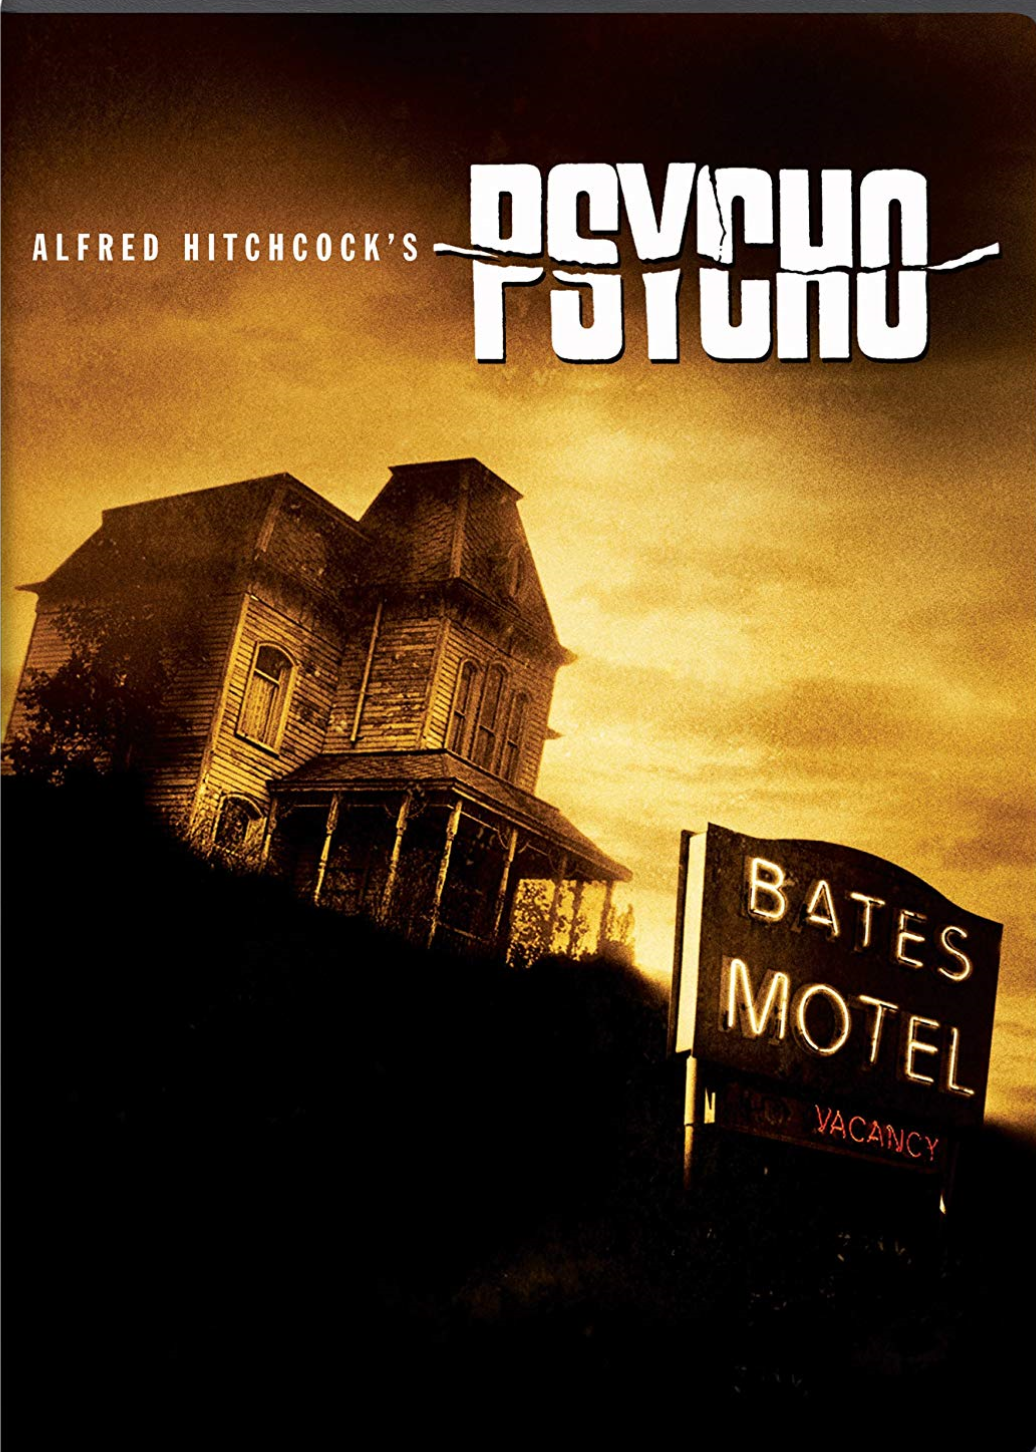 A large house looms in the background behind a sign reading Bates Motel